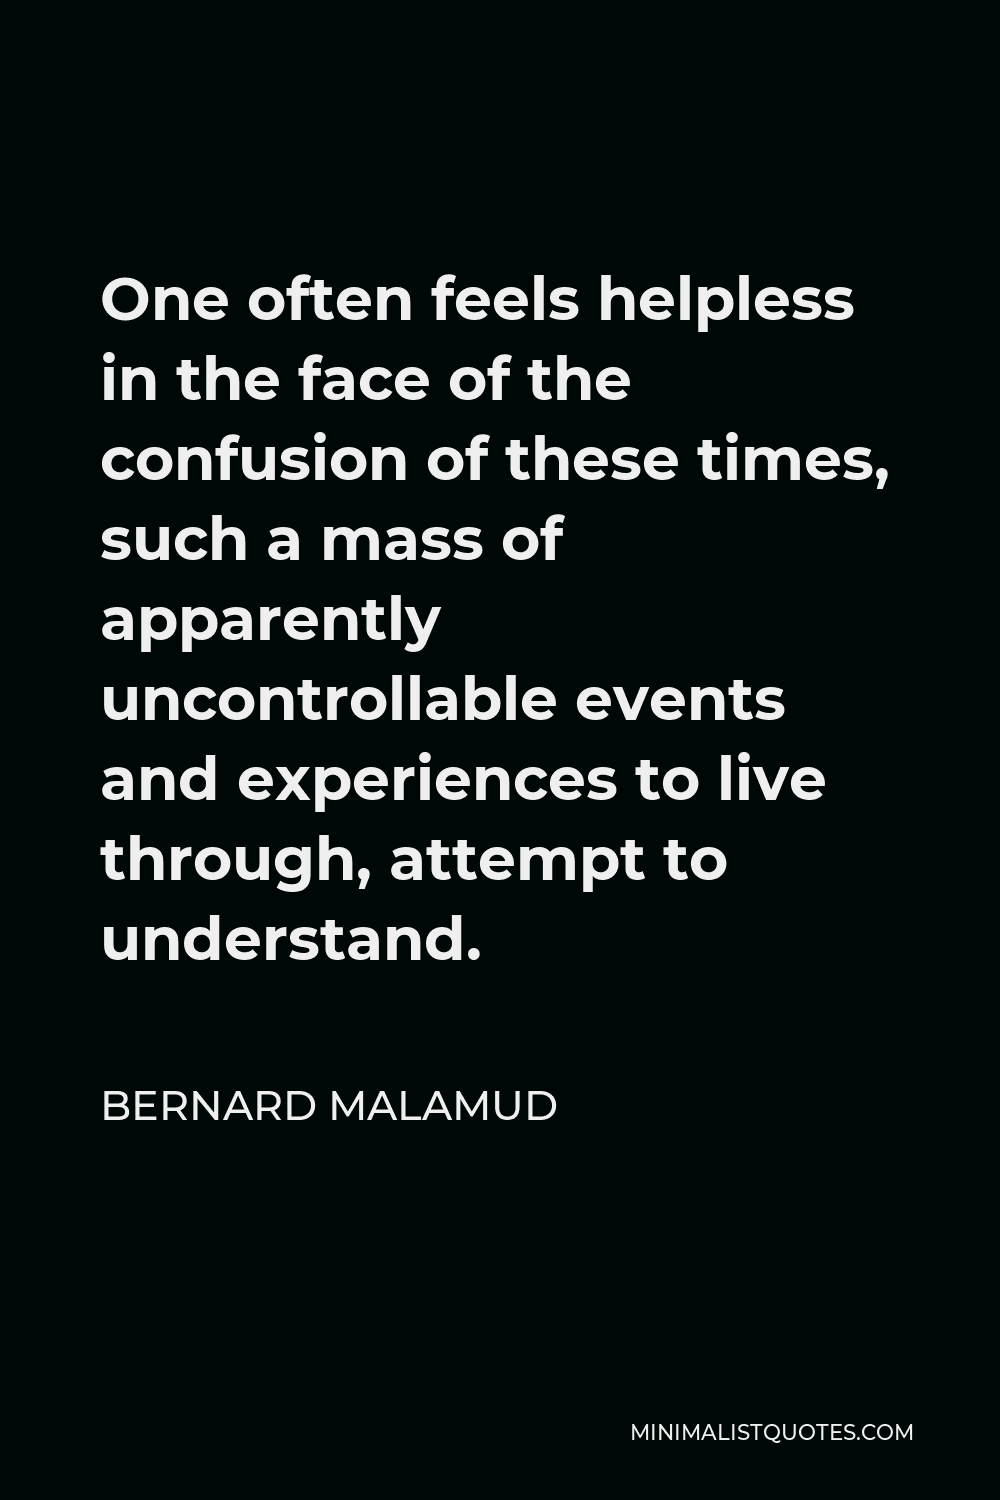 Bernard Malamud Quote - One often feels helpless in the face of the confusion of these times, such a mass of apparently uncontrollable events and experiences to live through, attempt to understand.